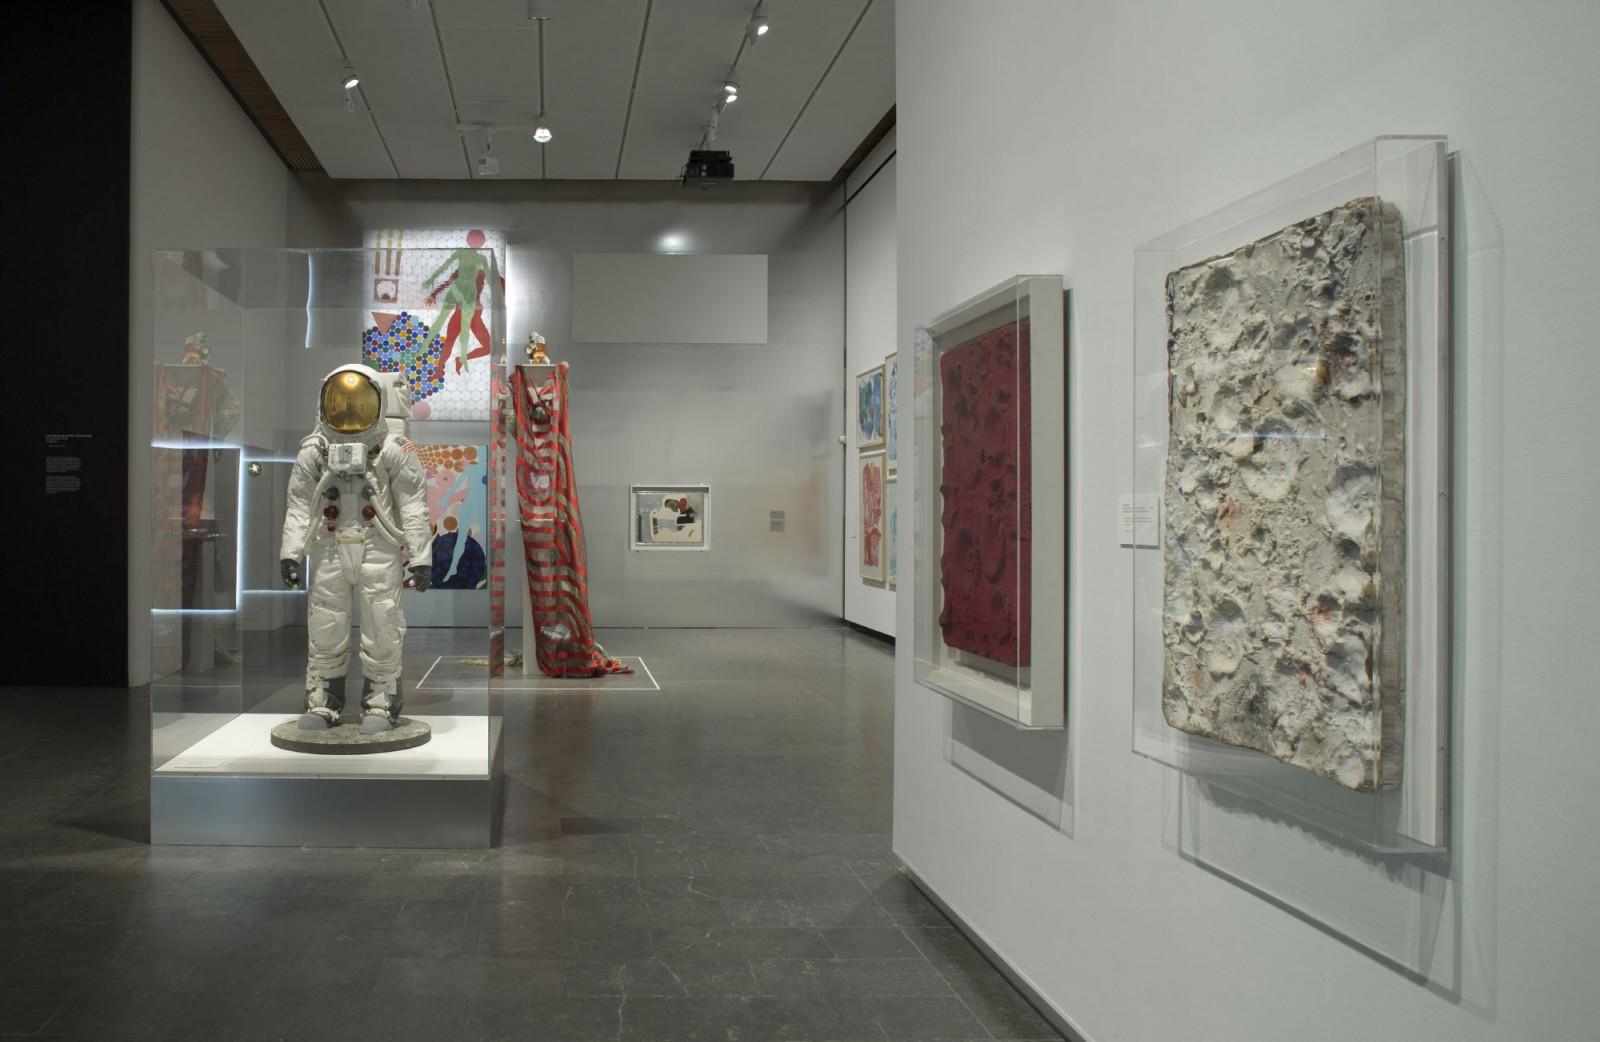 View of the exhibition "The Moon: From Inner Worlds to Outer Space", Louisiana Museum of Modern Art, 2018 (RP 12, RP 21)